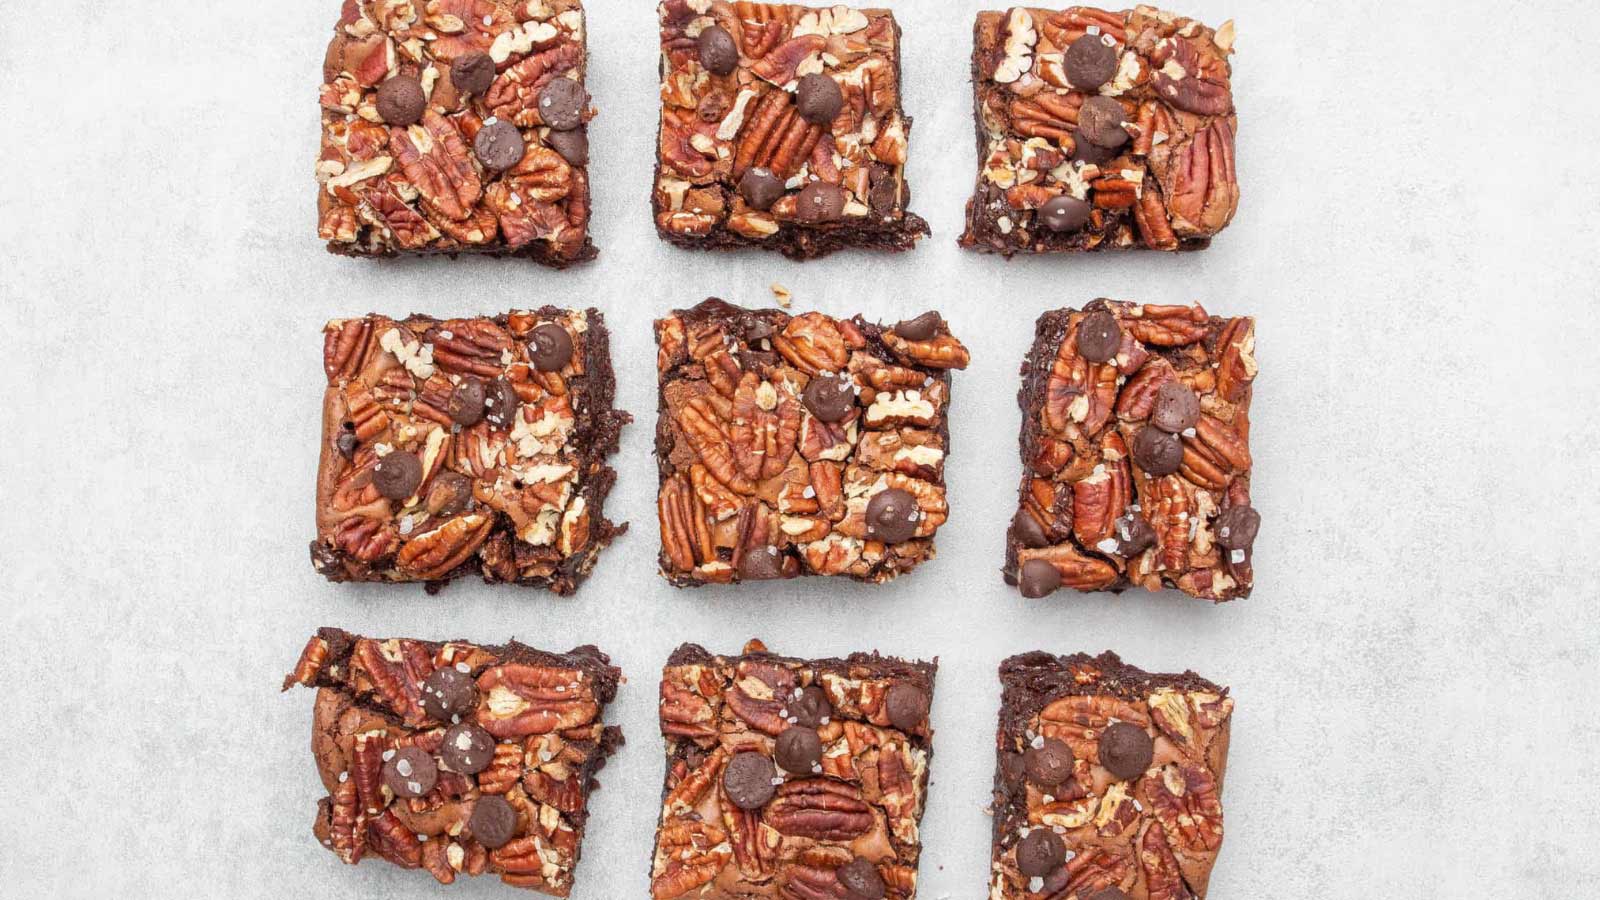 An overhead view of fudge pecan brownies cut and lined up in rows on white parchment.